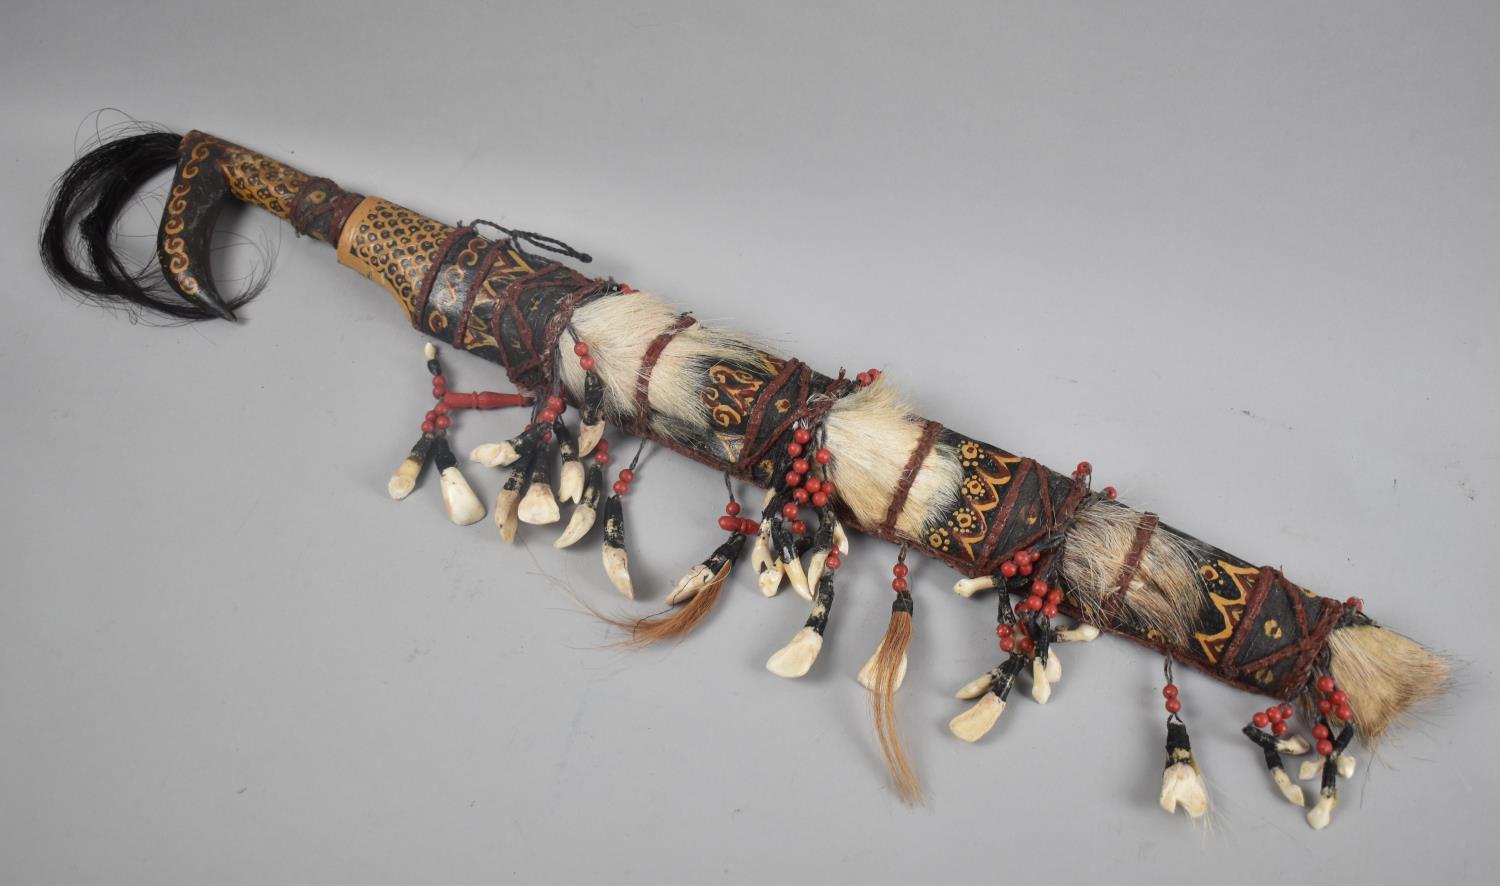 A Souvenir African Tribal Sword Decorated with Seashells, Animal Skin and Beads, Missing Dagger,